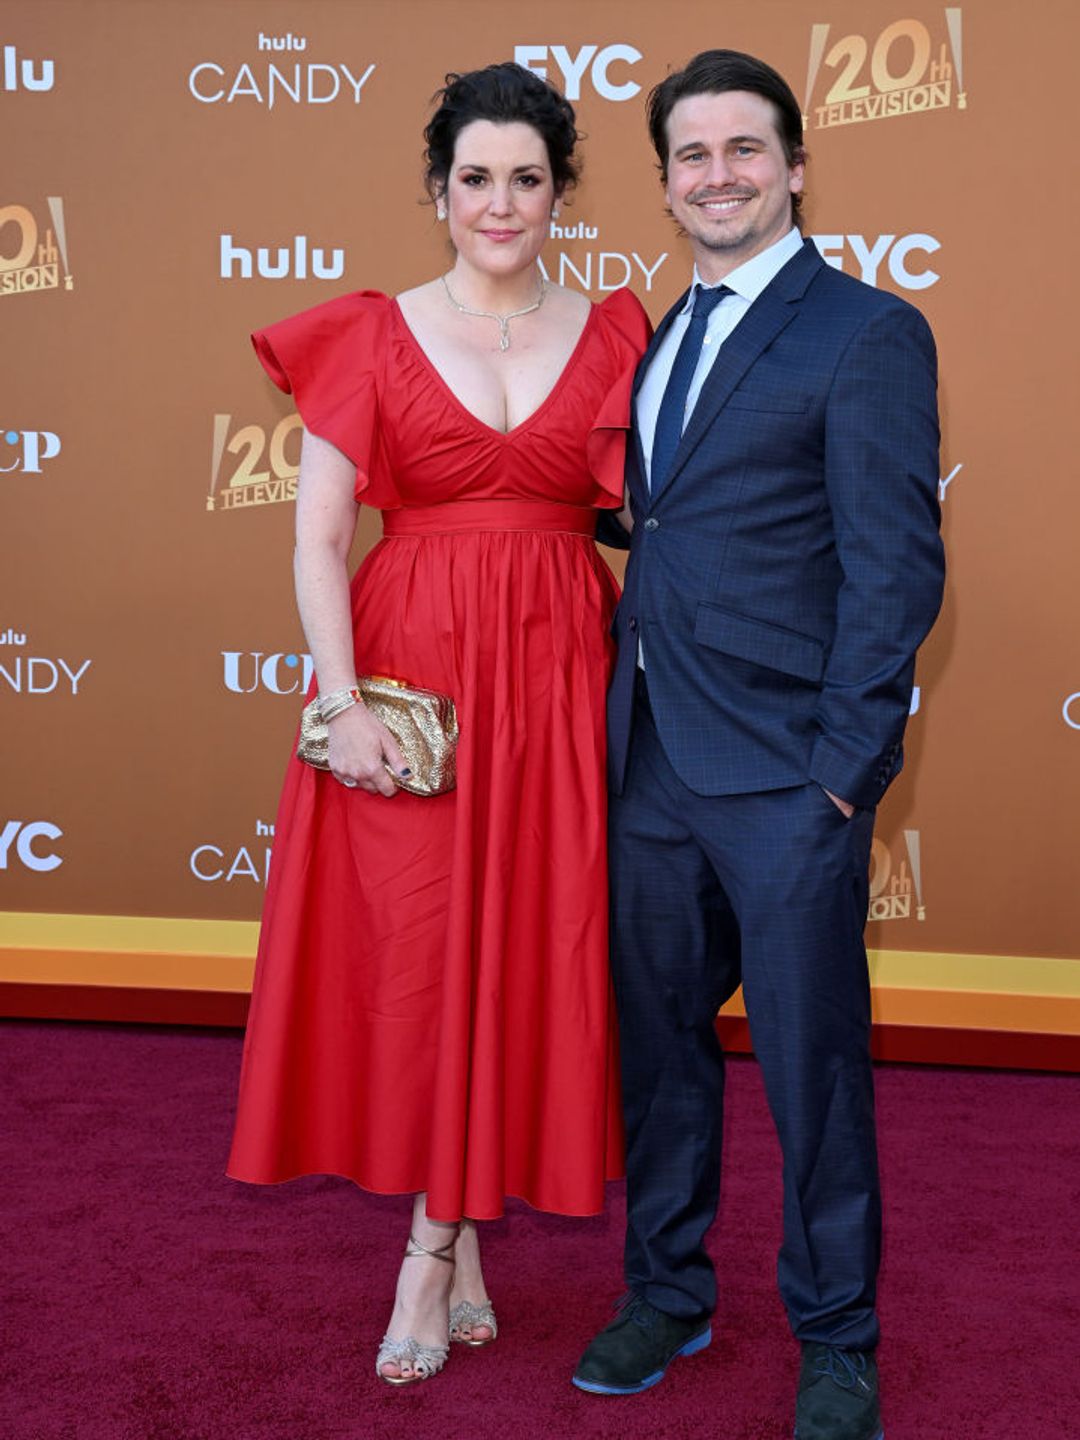 Melanie Lynskey and Jason Ritter at the red carpet premiere of Candy. 